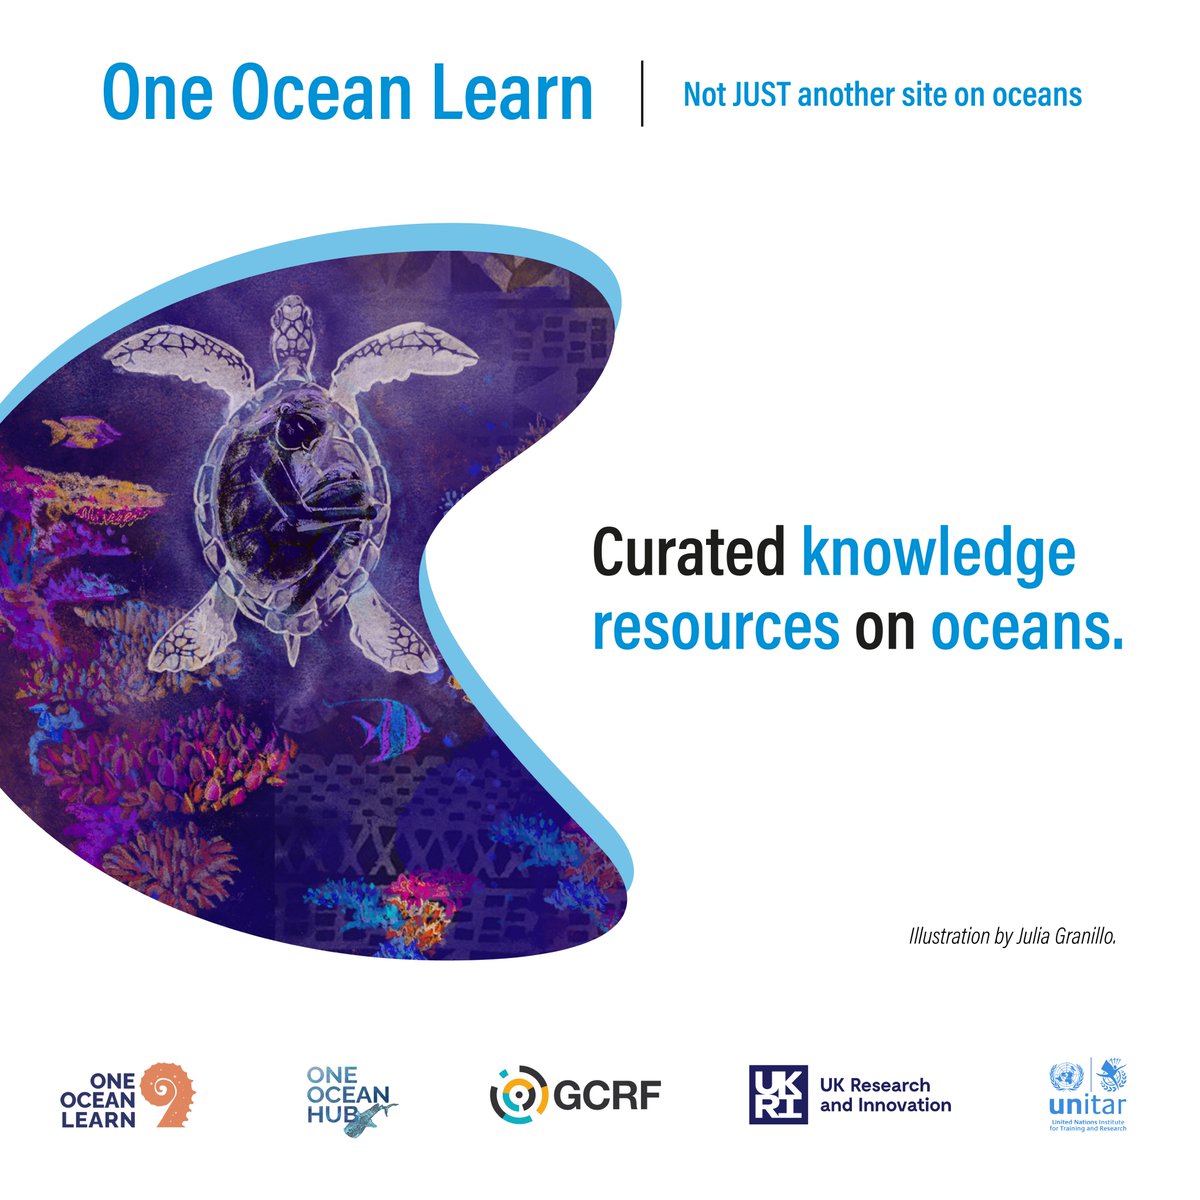 Did you know that our platform offers a treasure trove of resources for free? 🐳 From blogs and scientific articles to videos, courses, and training, we've got everything you need to deepen your knowledge about the #ocean. Explore our resources👉 oneoceanlearn.org/resources/